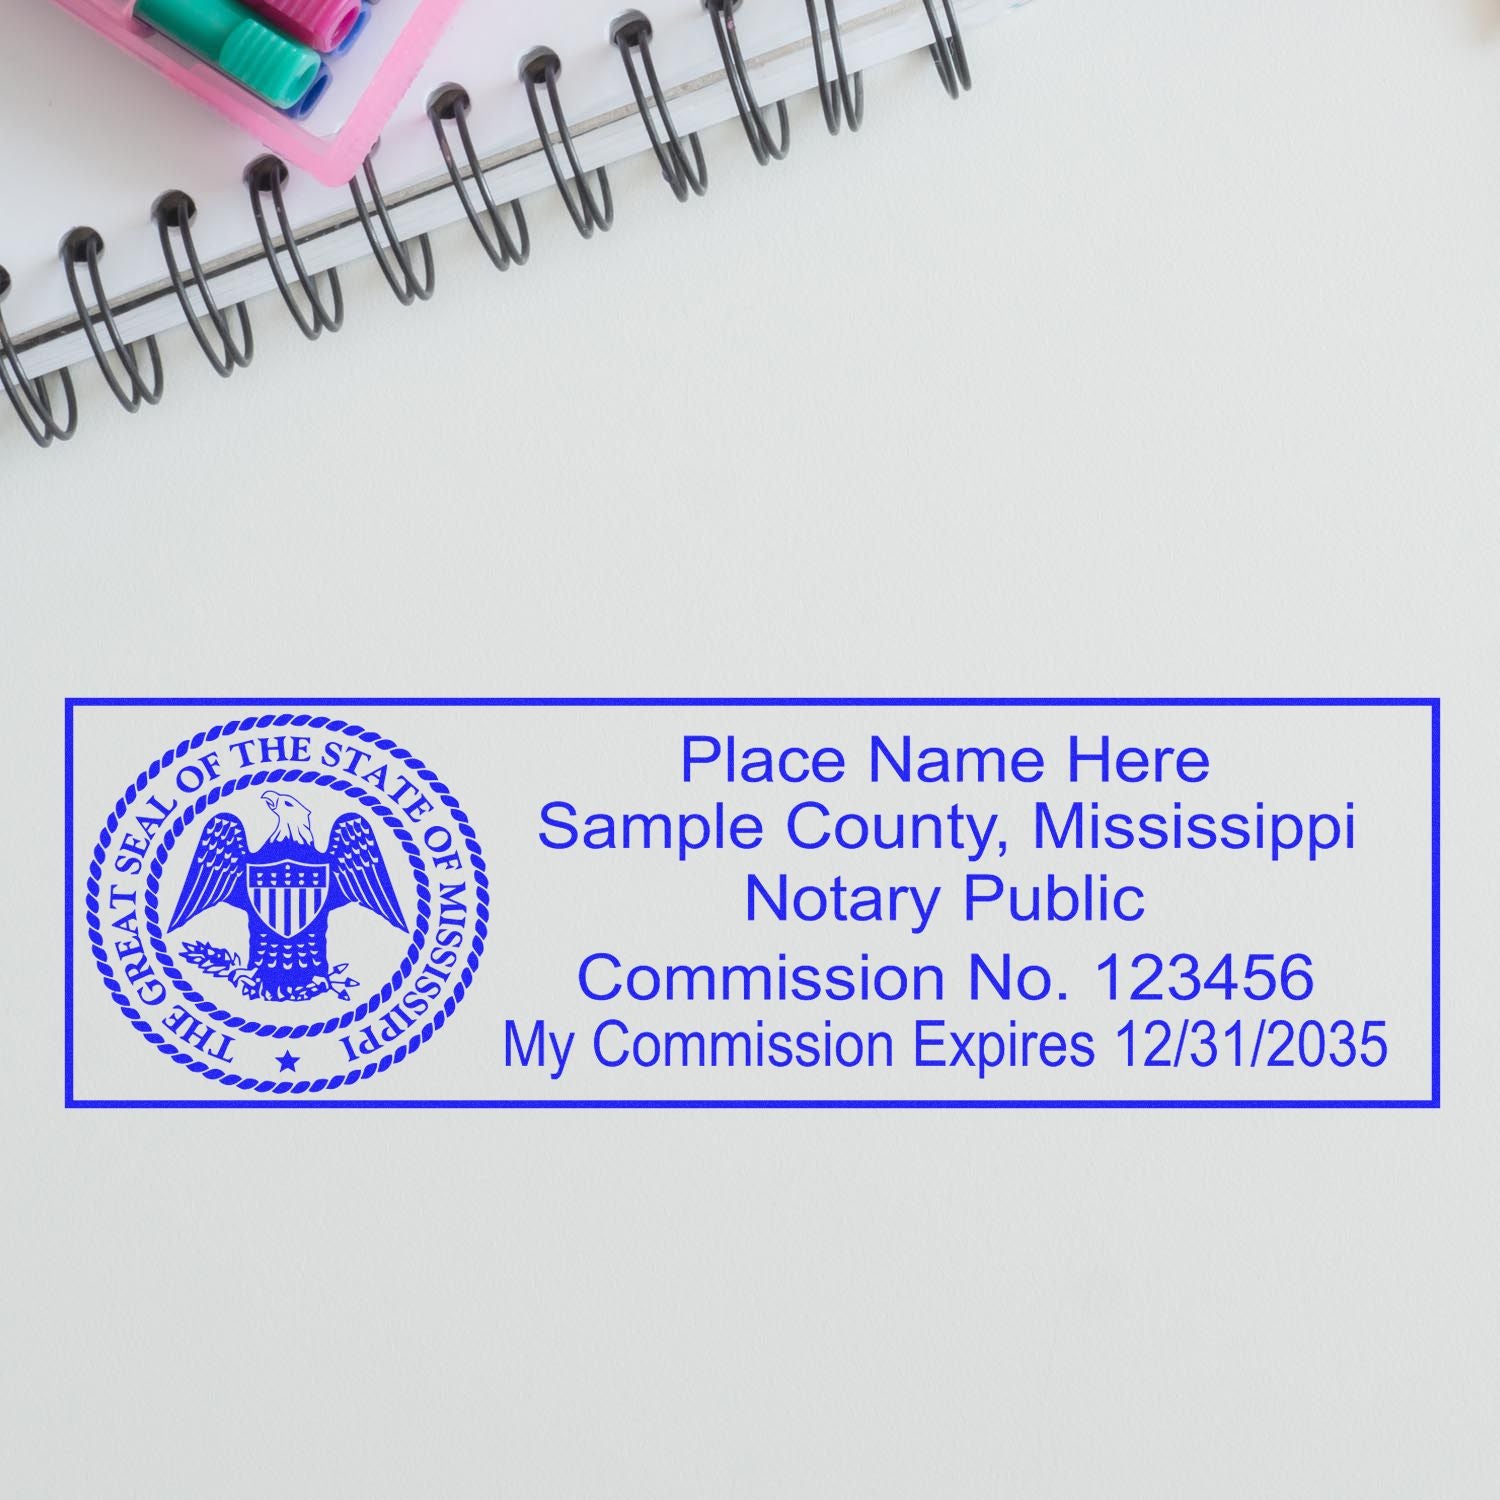 This paper is stamped with a sample imprint of the Wooden Handle Mississippi State Seal Notary Public Stamp, signifying its quality and reliability.